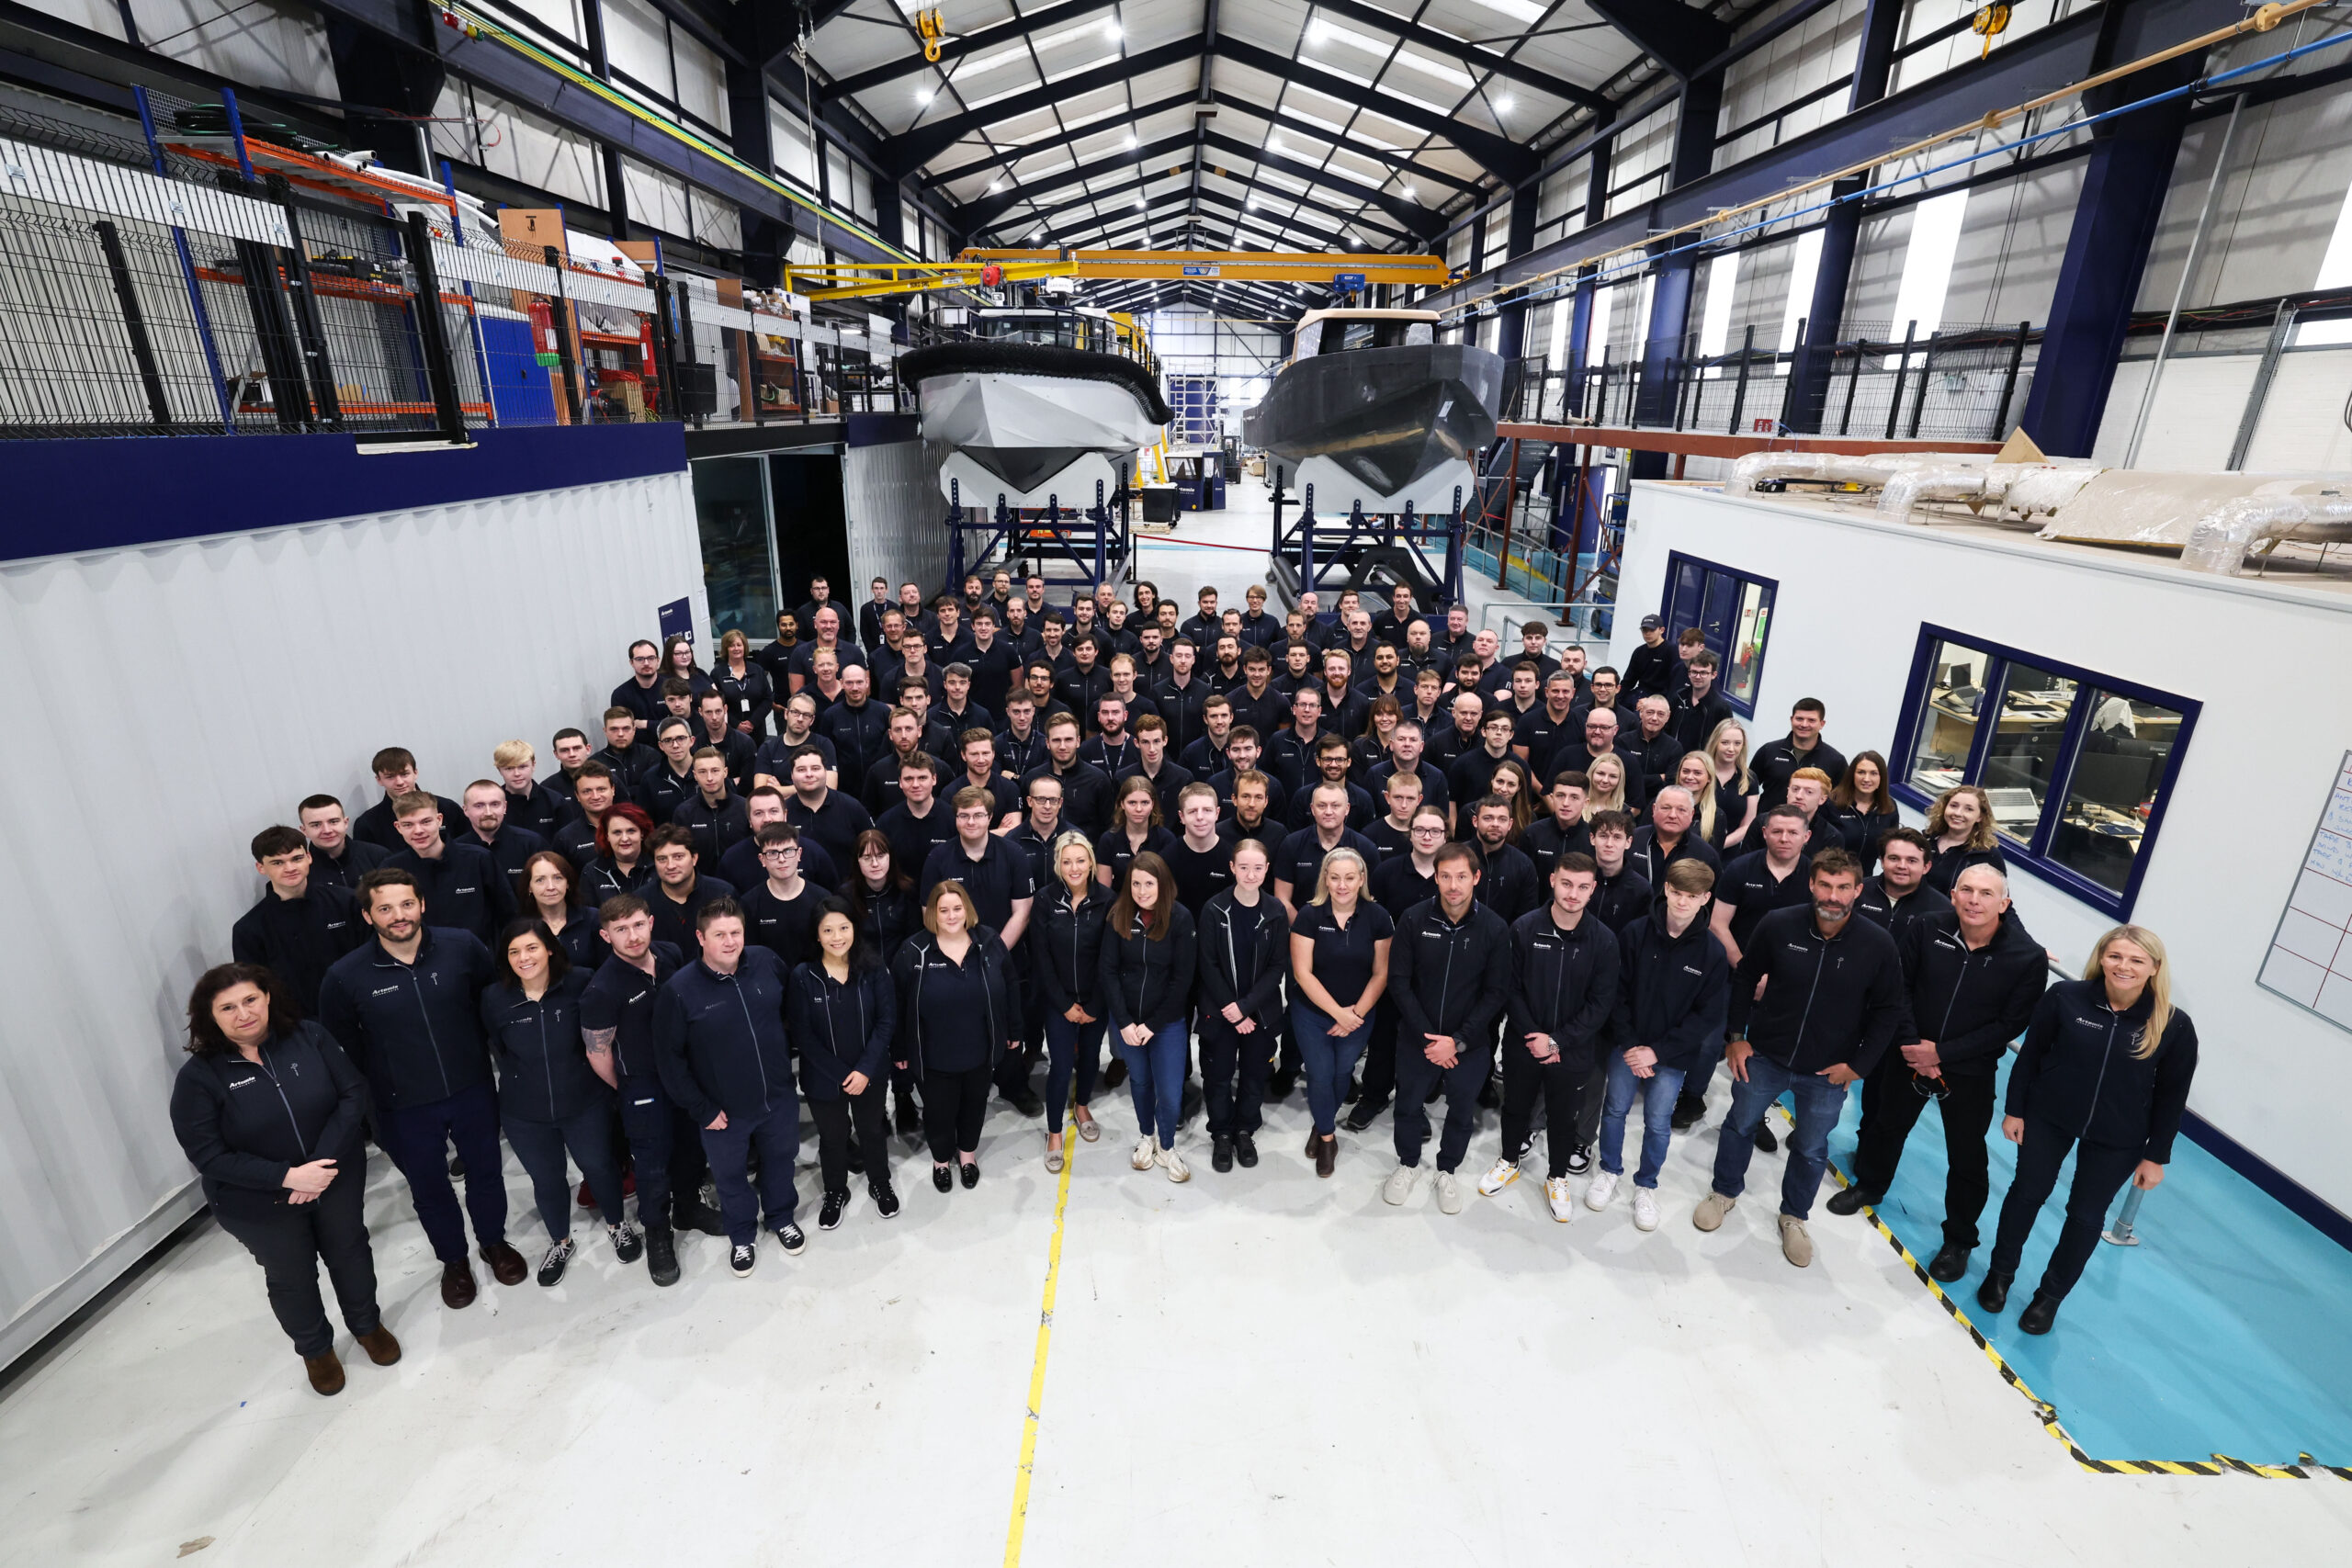 Group shot of 150 employees in manufacturing facility